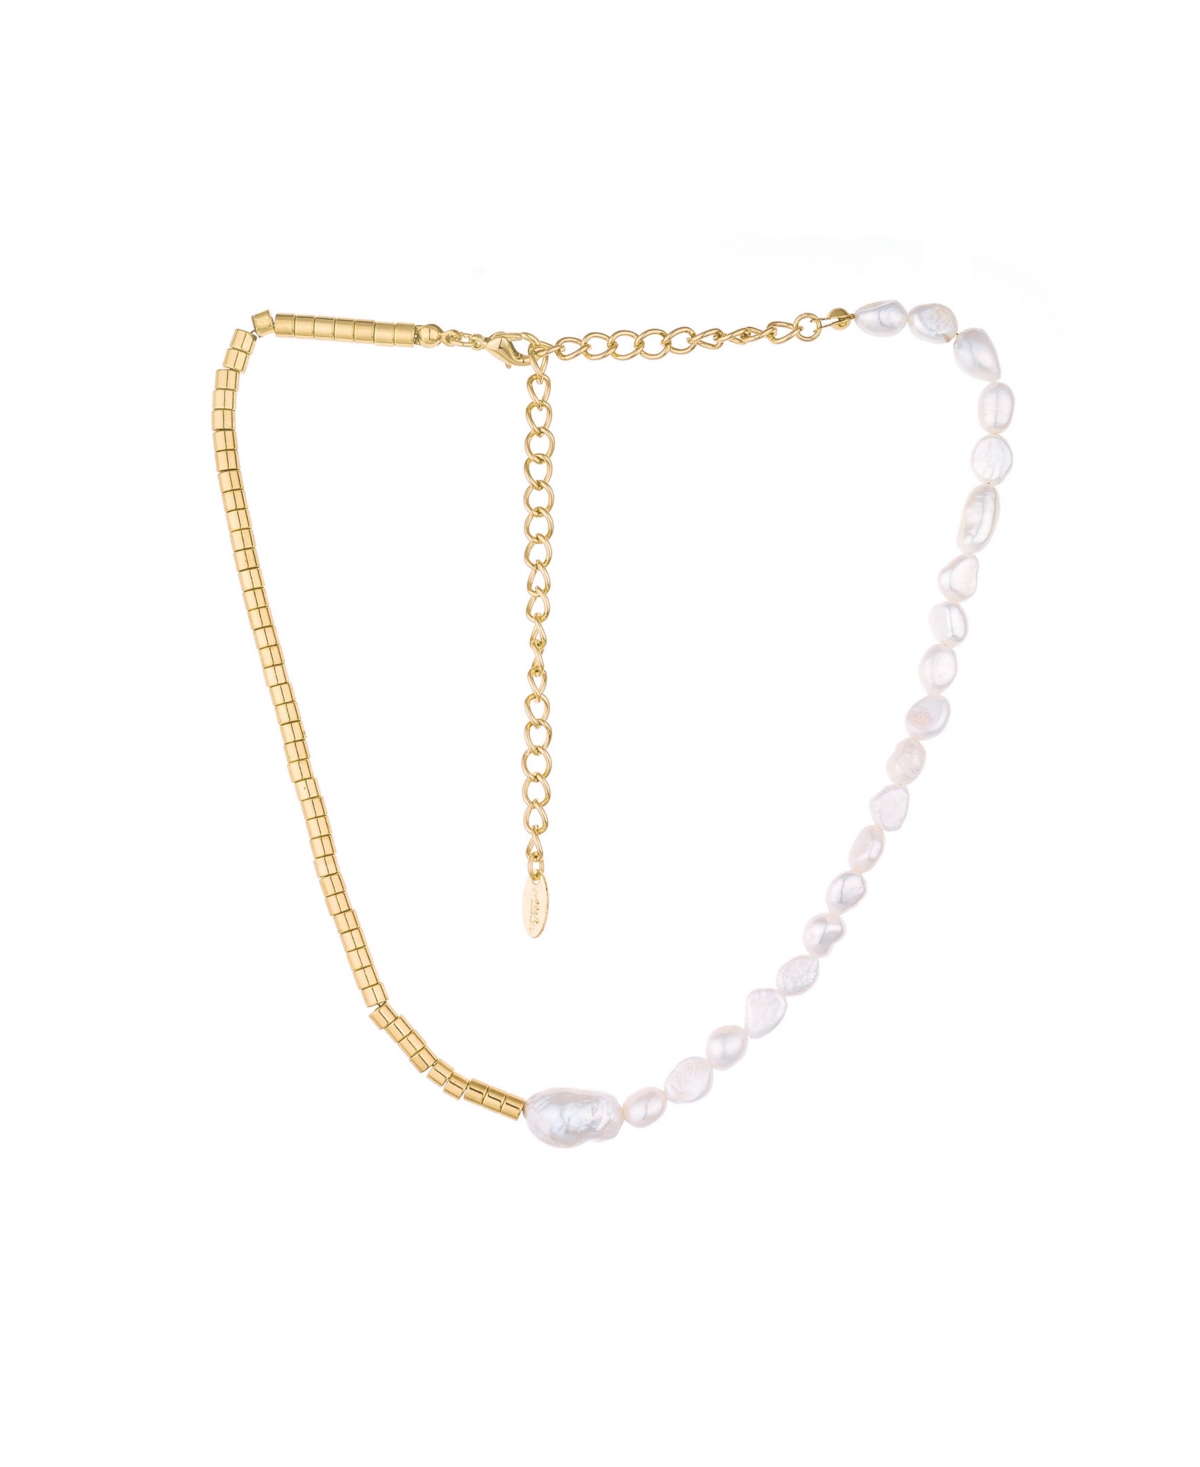 ETTIKA 18K GOLD-PLATED BEADED & CULTURED FRESHWATER PEARL ASYMMETRICAL NECKLACE, 15" + 5" EXTENDER